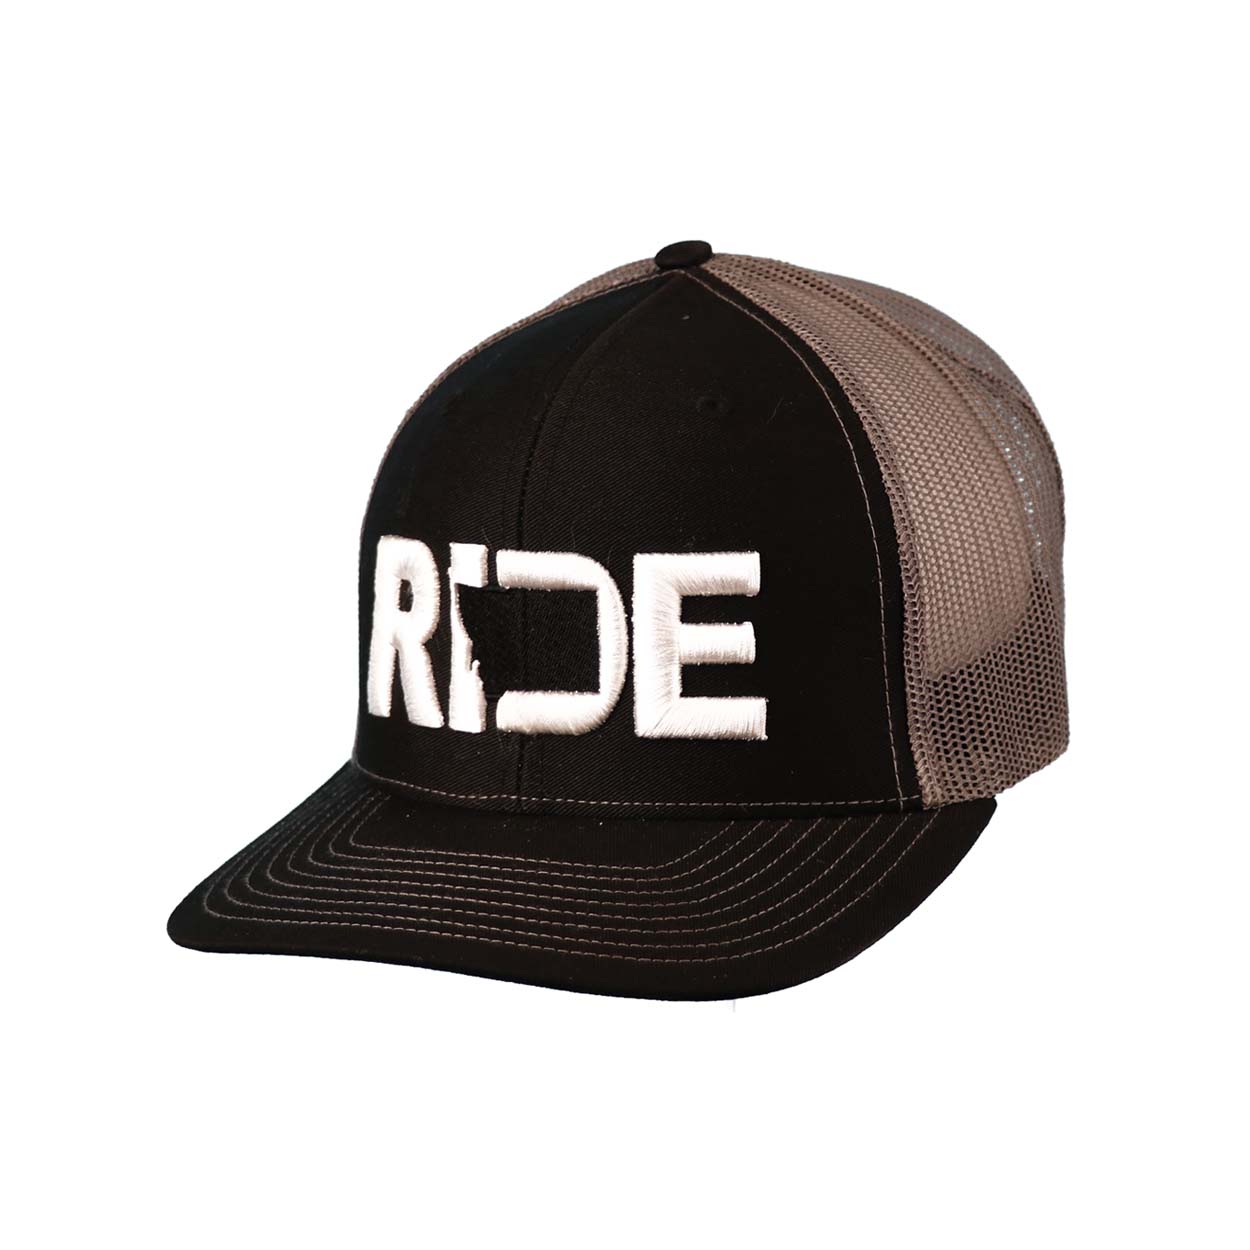 Ride Montana Classic Embroidered Snapback Trucker Hat Black/Charcoal